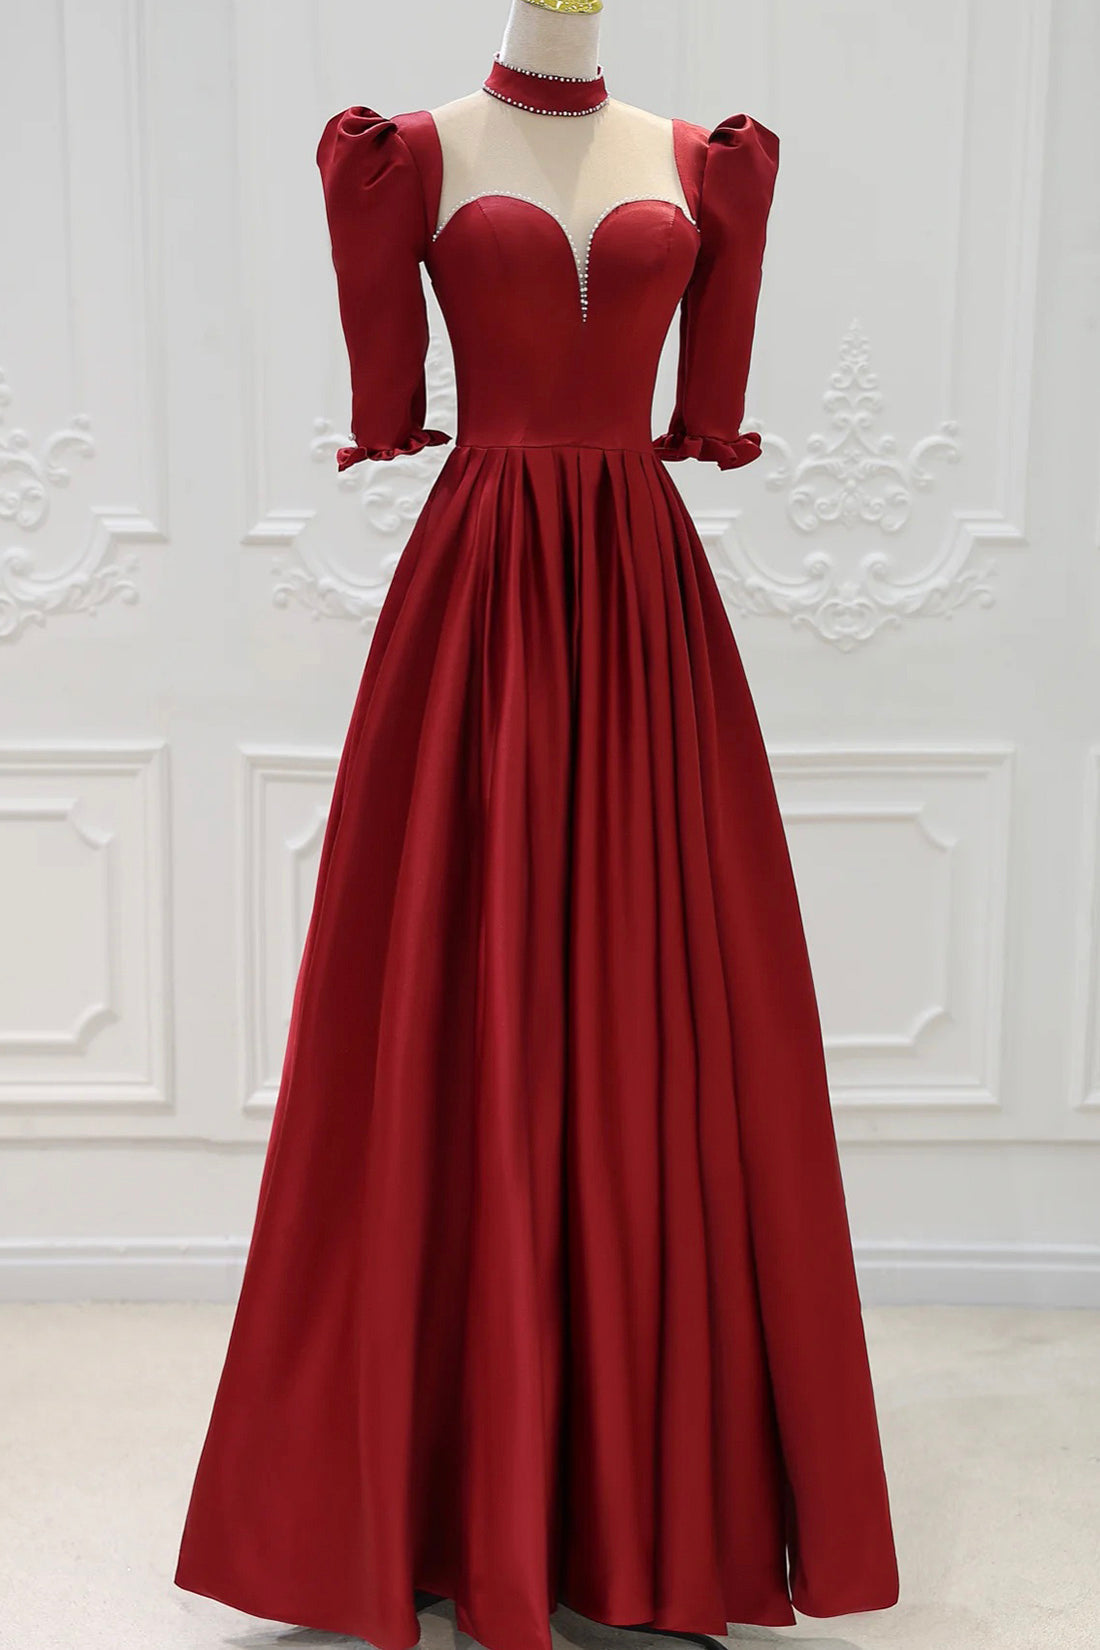 Burgundy Satin High Neck Long Prom Dress Outfits For Girls, Burgundy A-Line Evening Party Dress